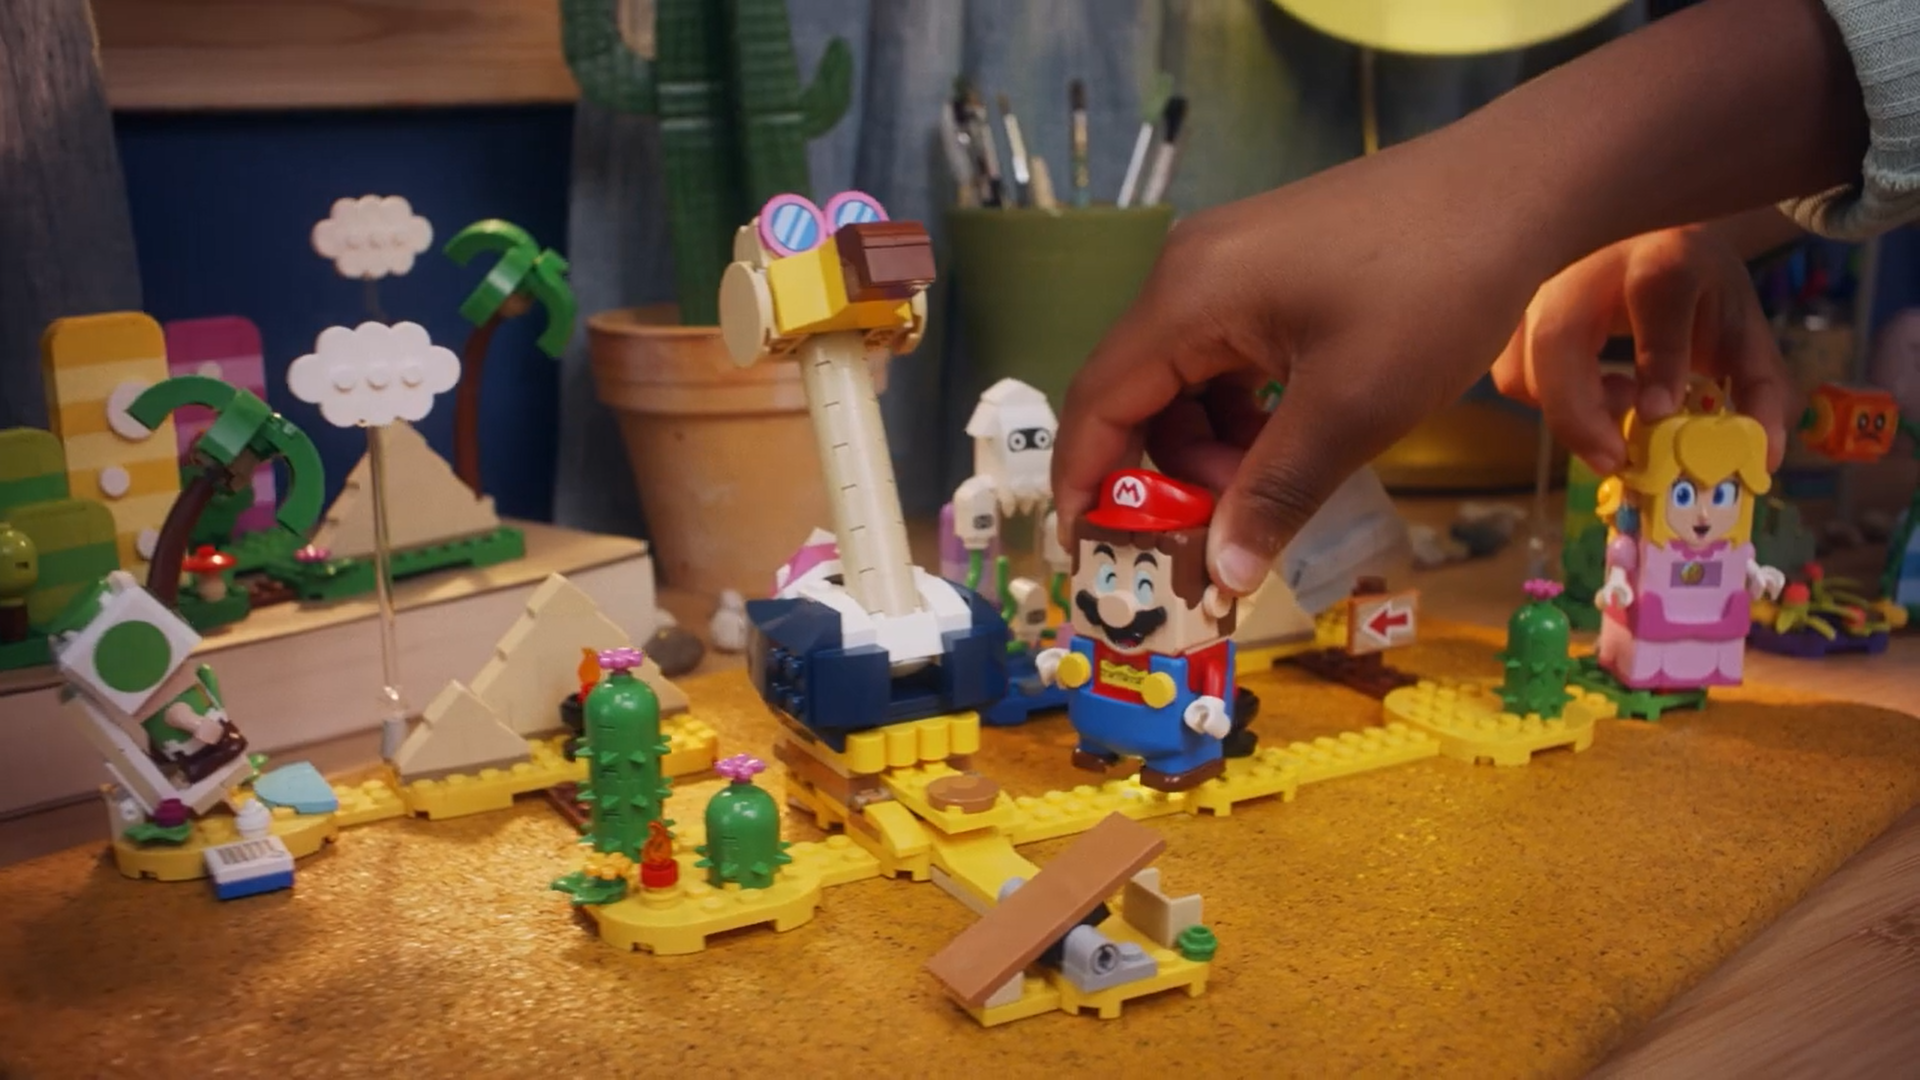 Lego Super Mario universe gets new sets this January 